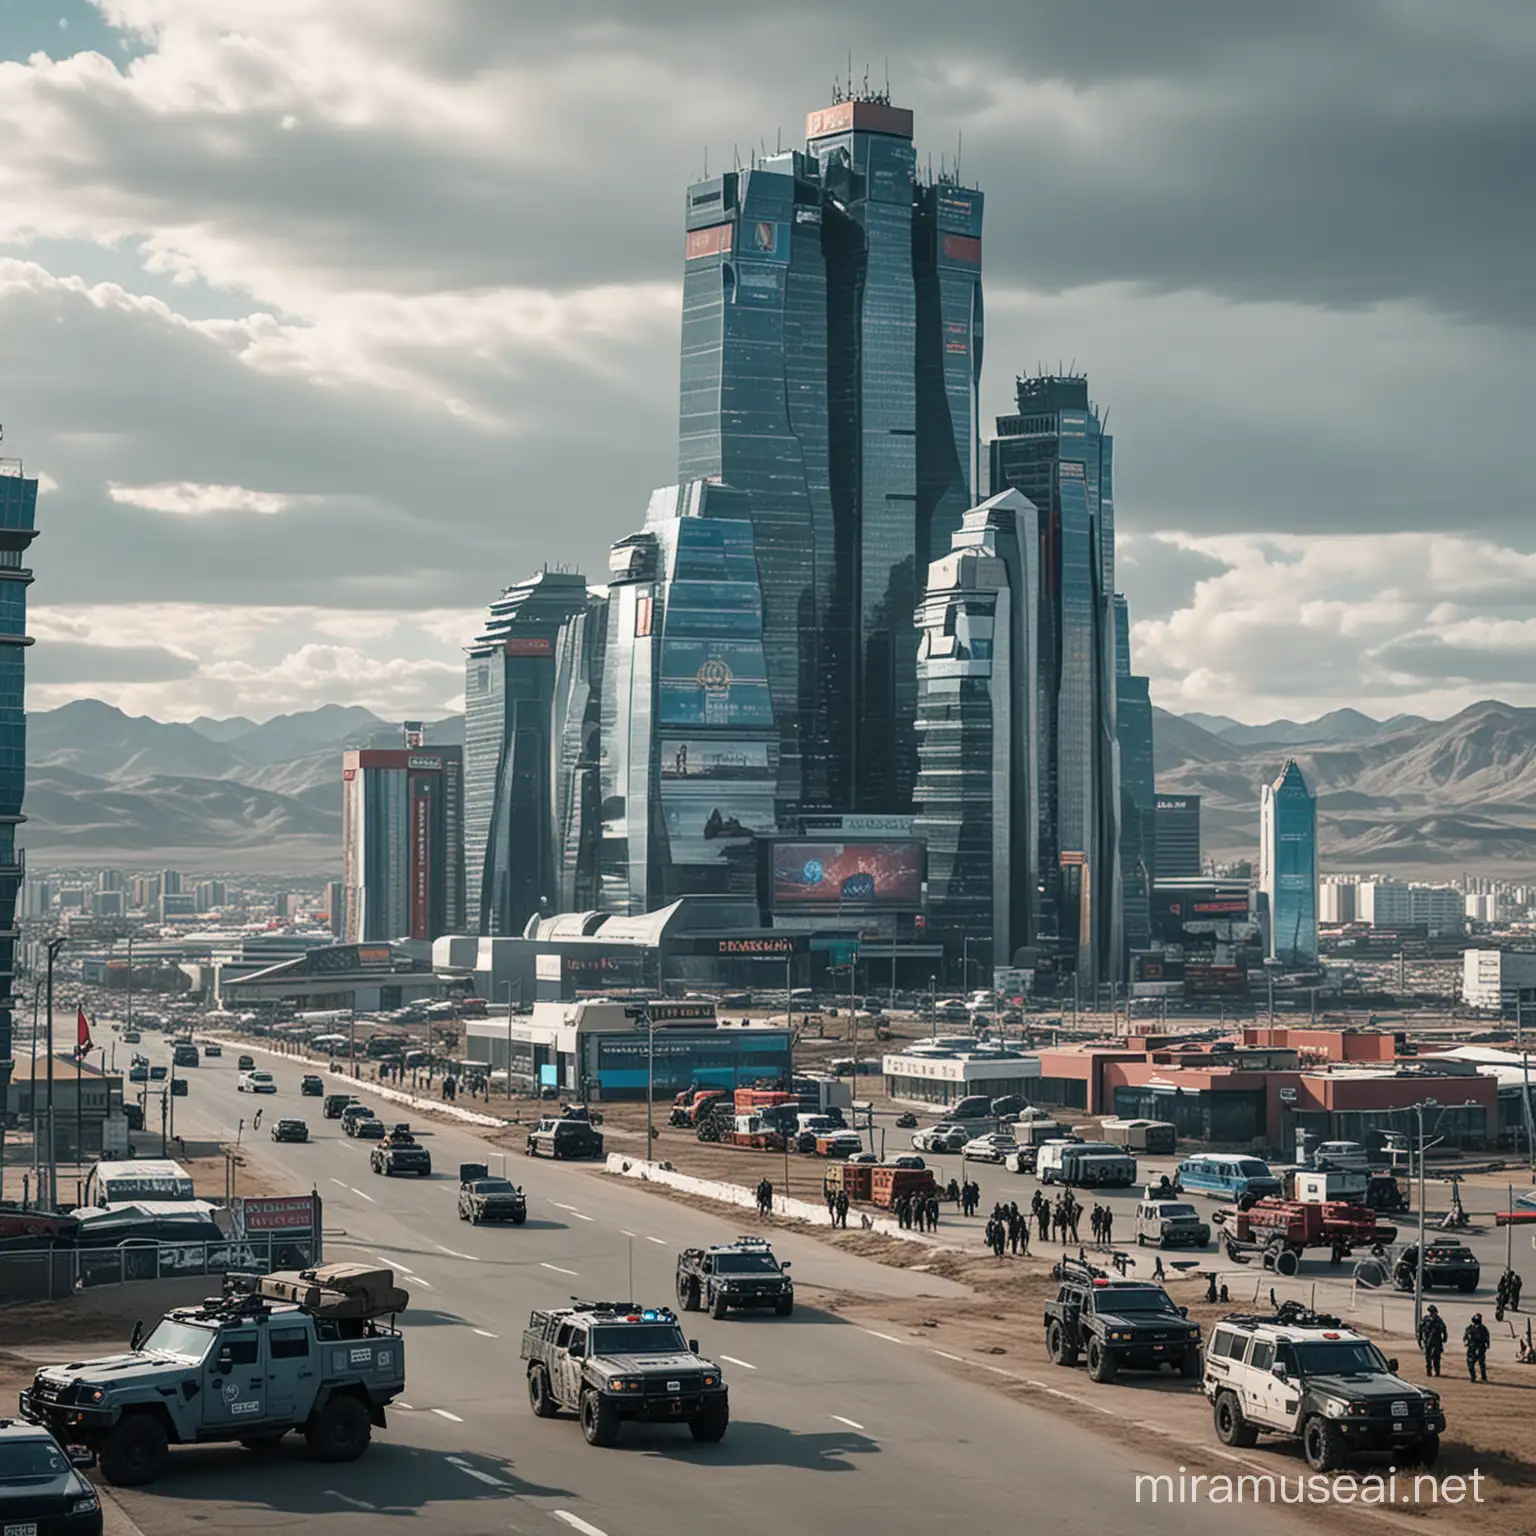 Giant high tech Cybersecurity mansion skyscraper buildings, Totalitarian, Disinformation Billboards, Lots of industrial cameras and armed men patrolling, Armored vehicles, Helicopters, Planes, Boats, City patrolled with heavy military, Located in a fictional futuristic Ulaanbaatar Mongolia Dystopia or Utopia